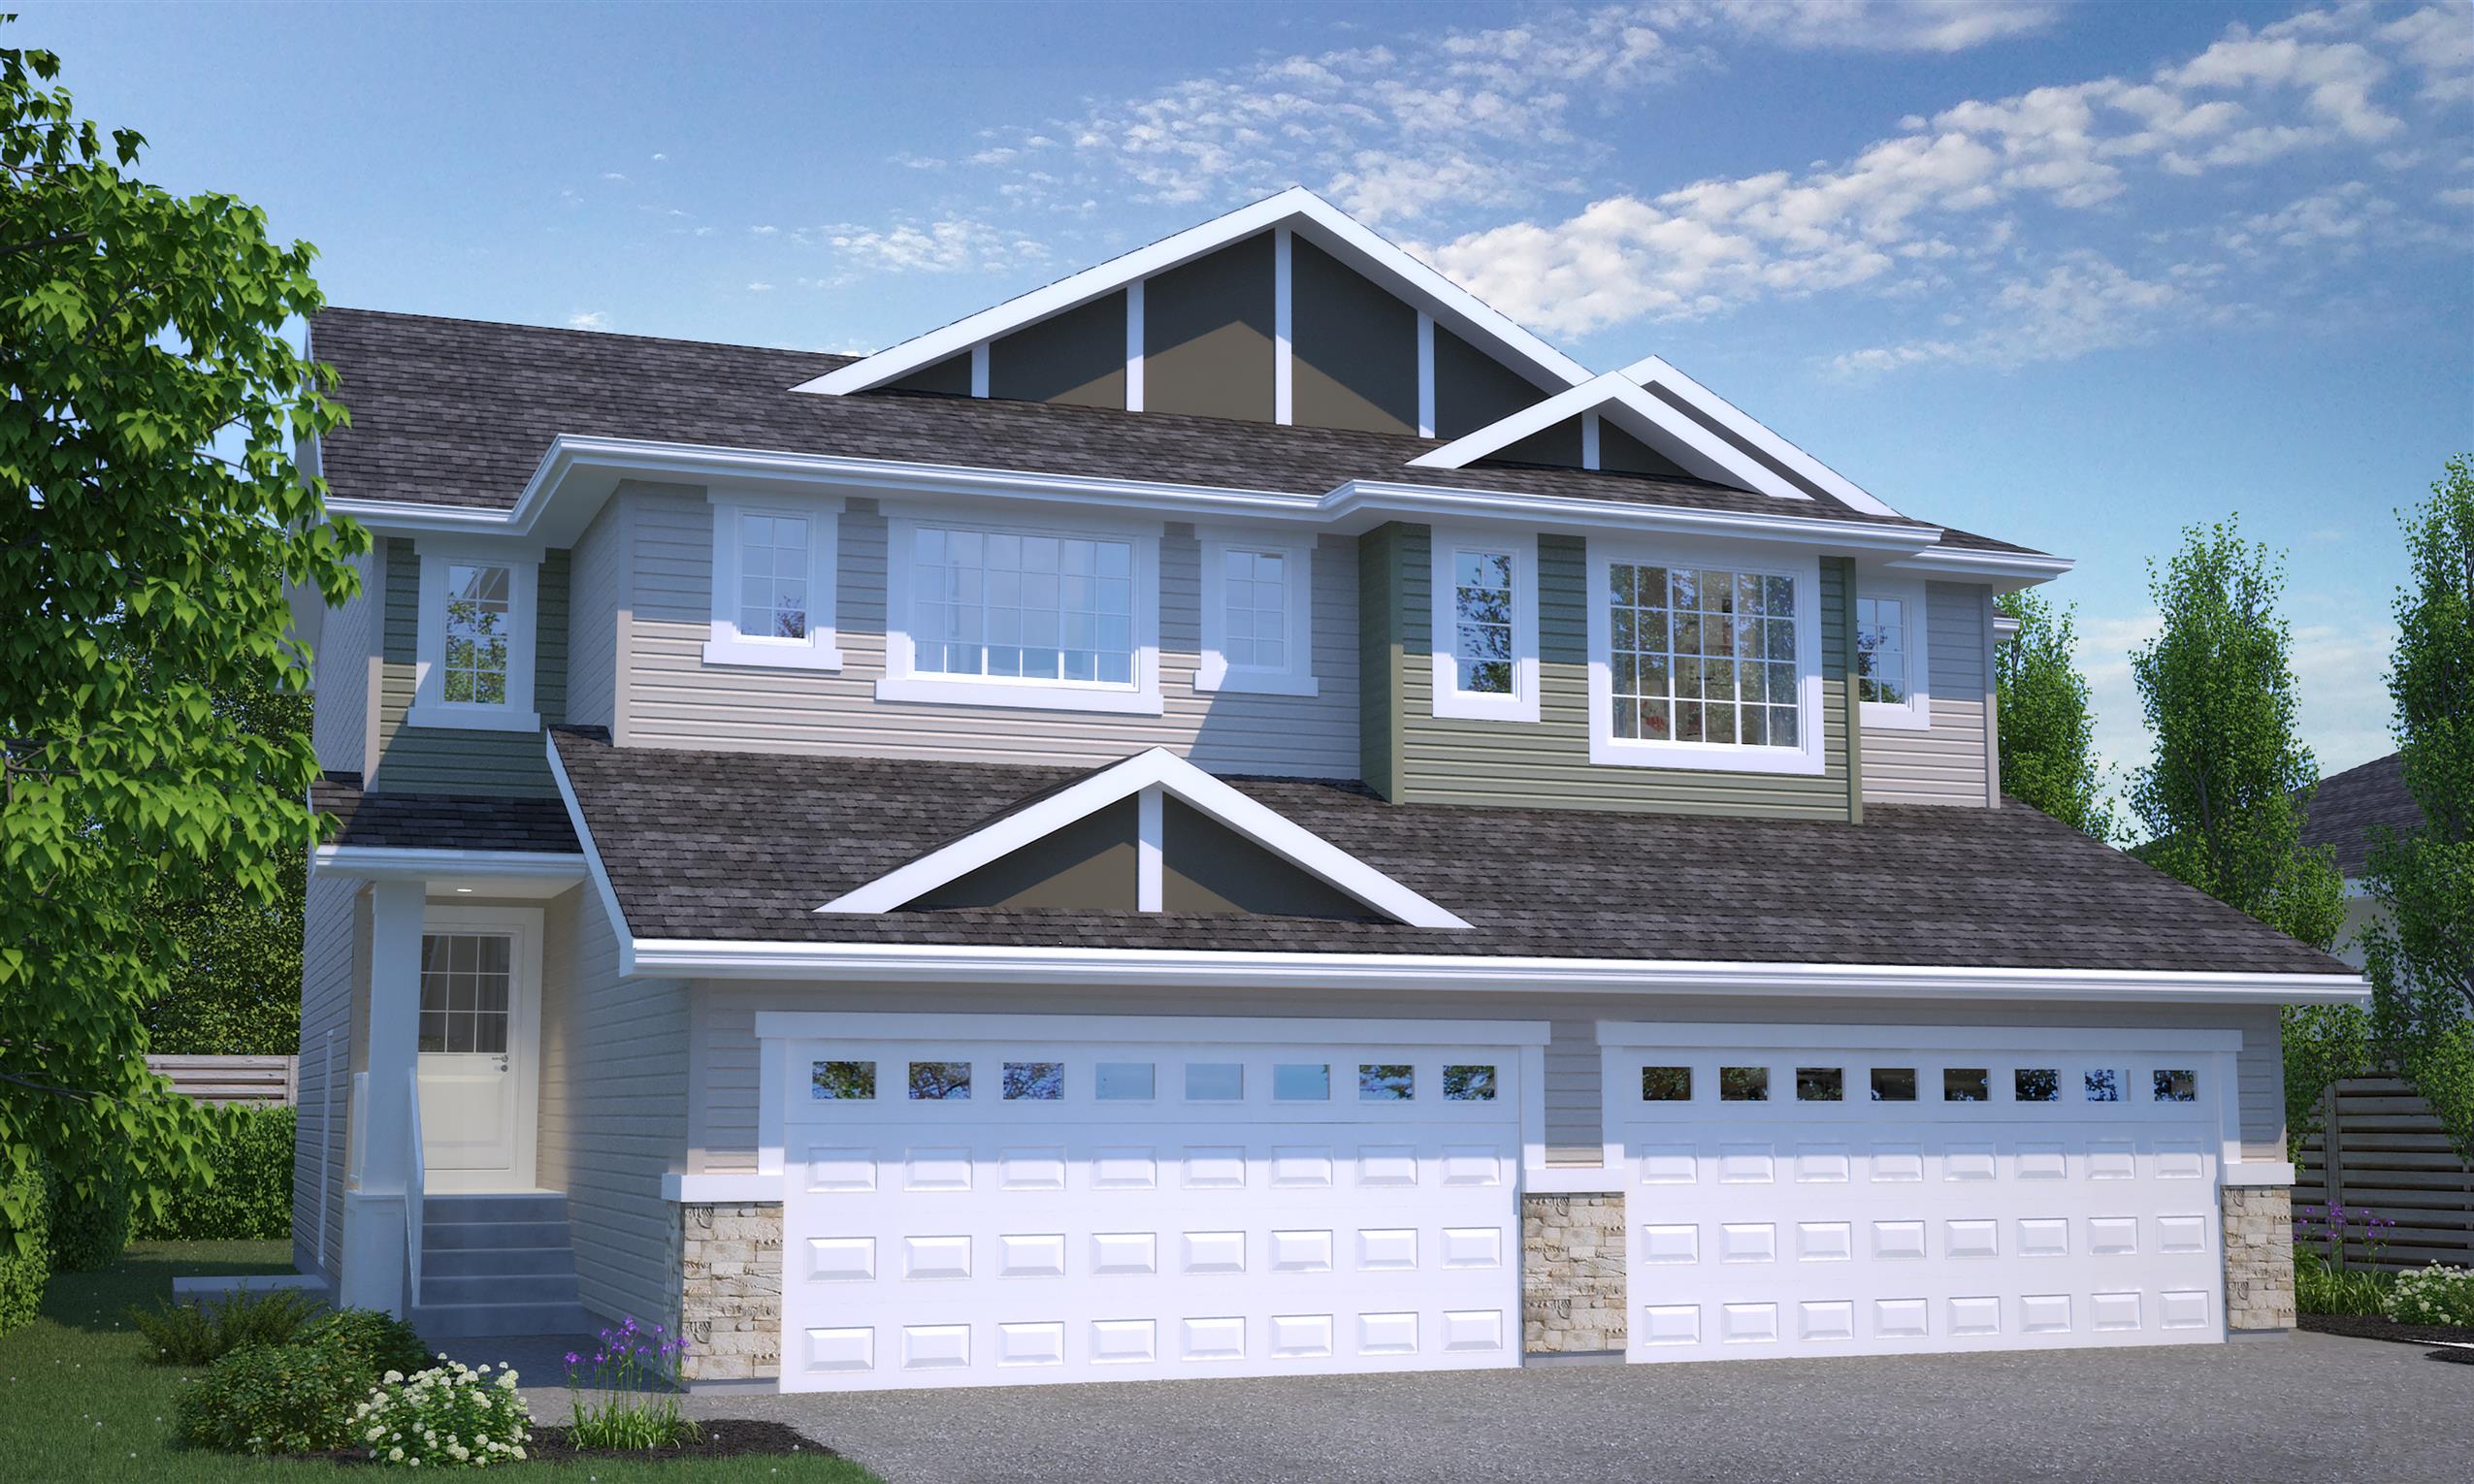 Lawrence/Lawrence Duplex Rendering